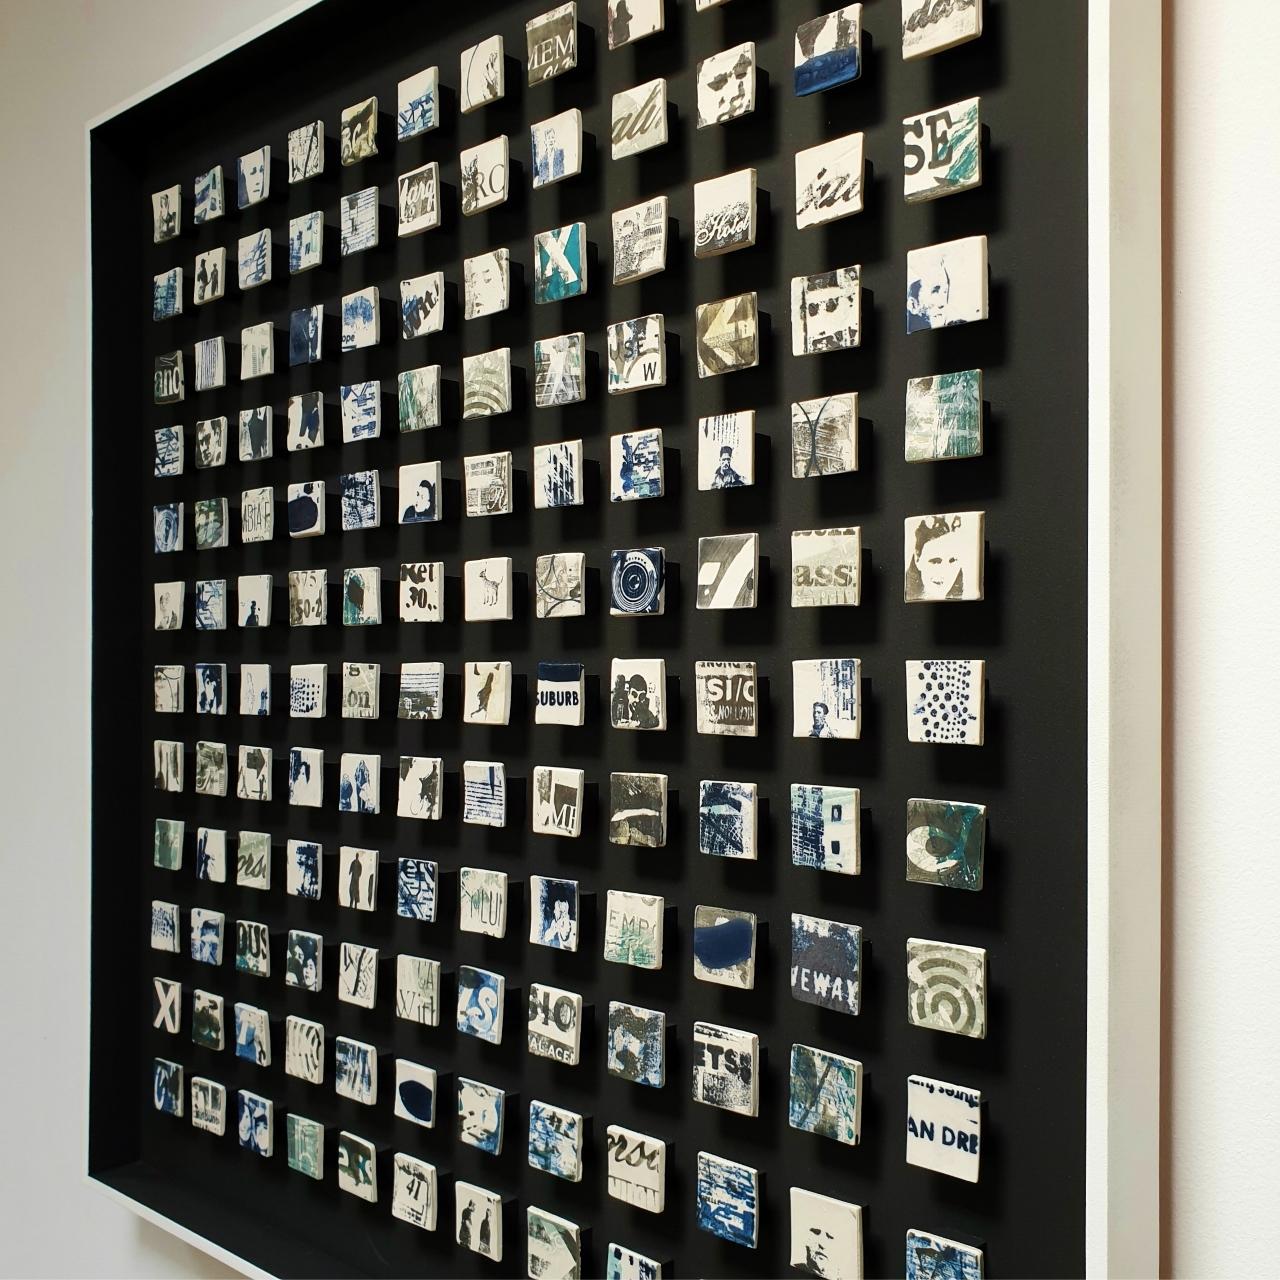 Monday blues is a unique contemporary modern wall object by British artist Kate Brett. This one of a kind object consists of  144 handmade unglazed porcelain elements mounted in a hand painted matt black frame with a white raised edge. At the rear